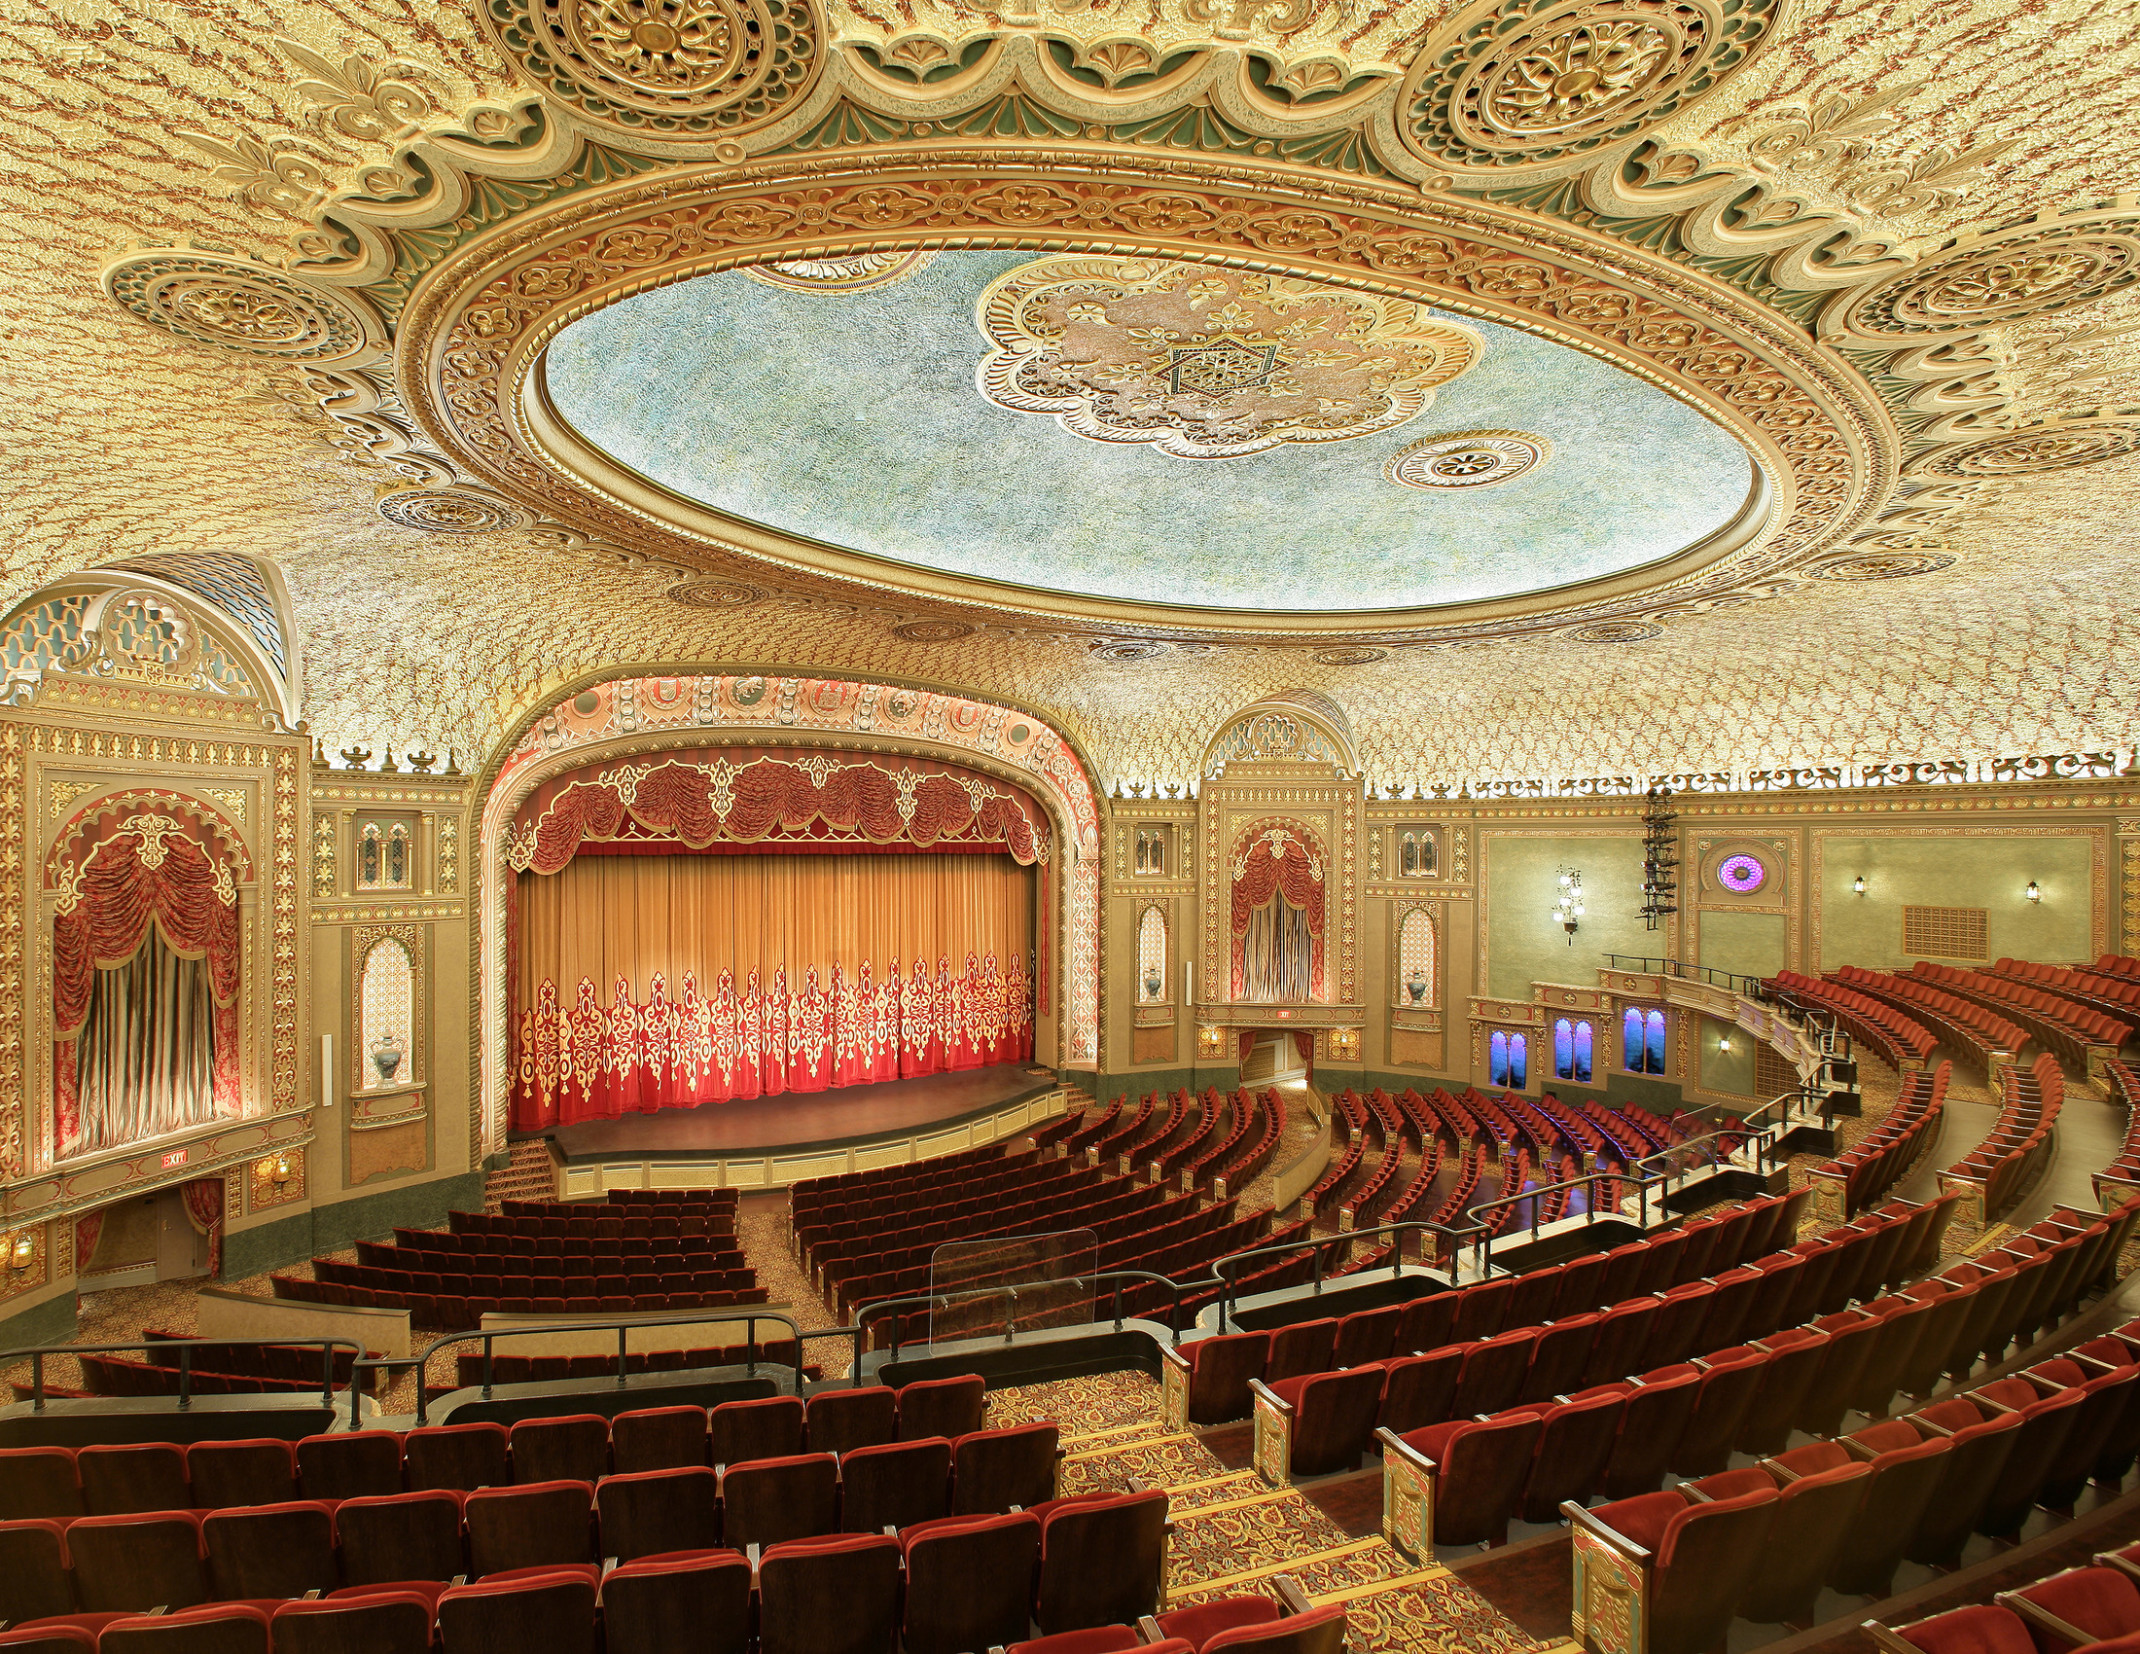 Interior of the Tennessee Theater, seen from the balcony looking to stage, ornate golden-patterned ceiling with round, recessed detail, dark red theatre seating